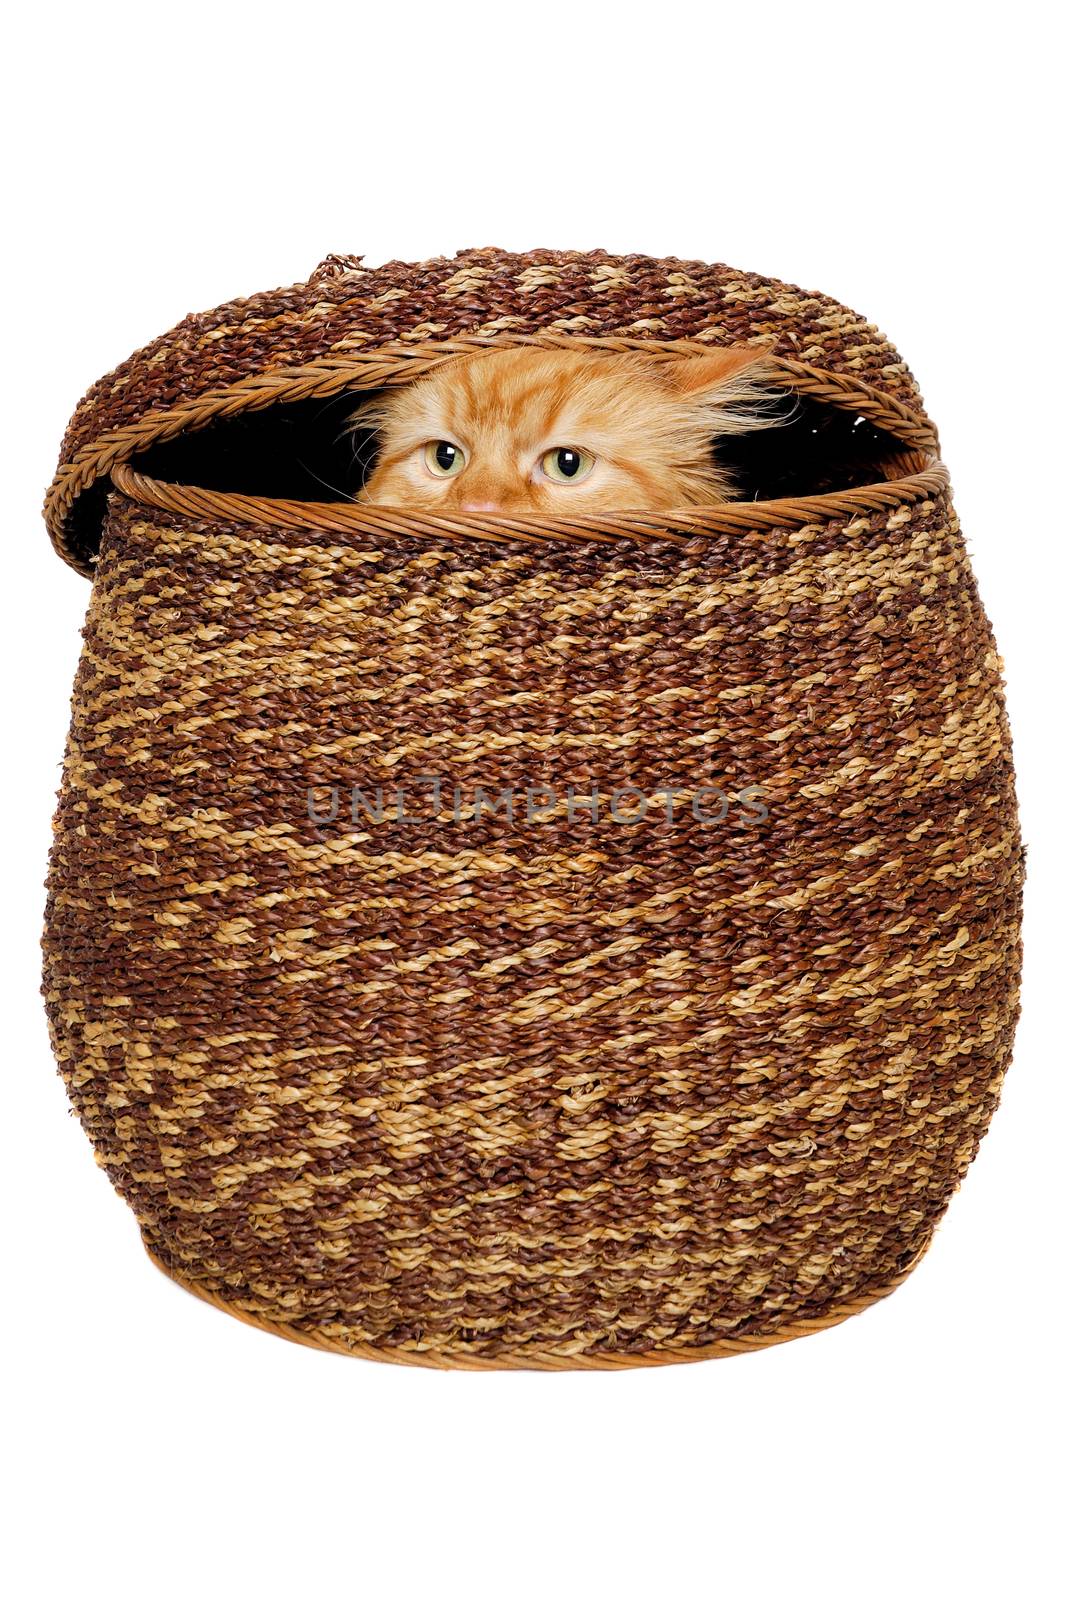 Cat is hiding in a basket. Isolated on a clean white background.